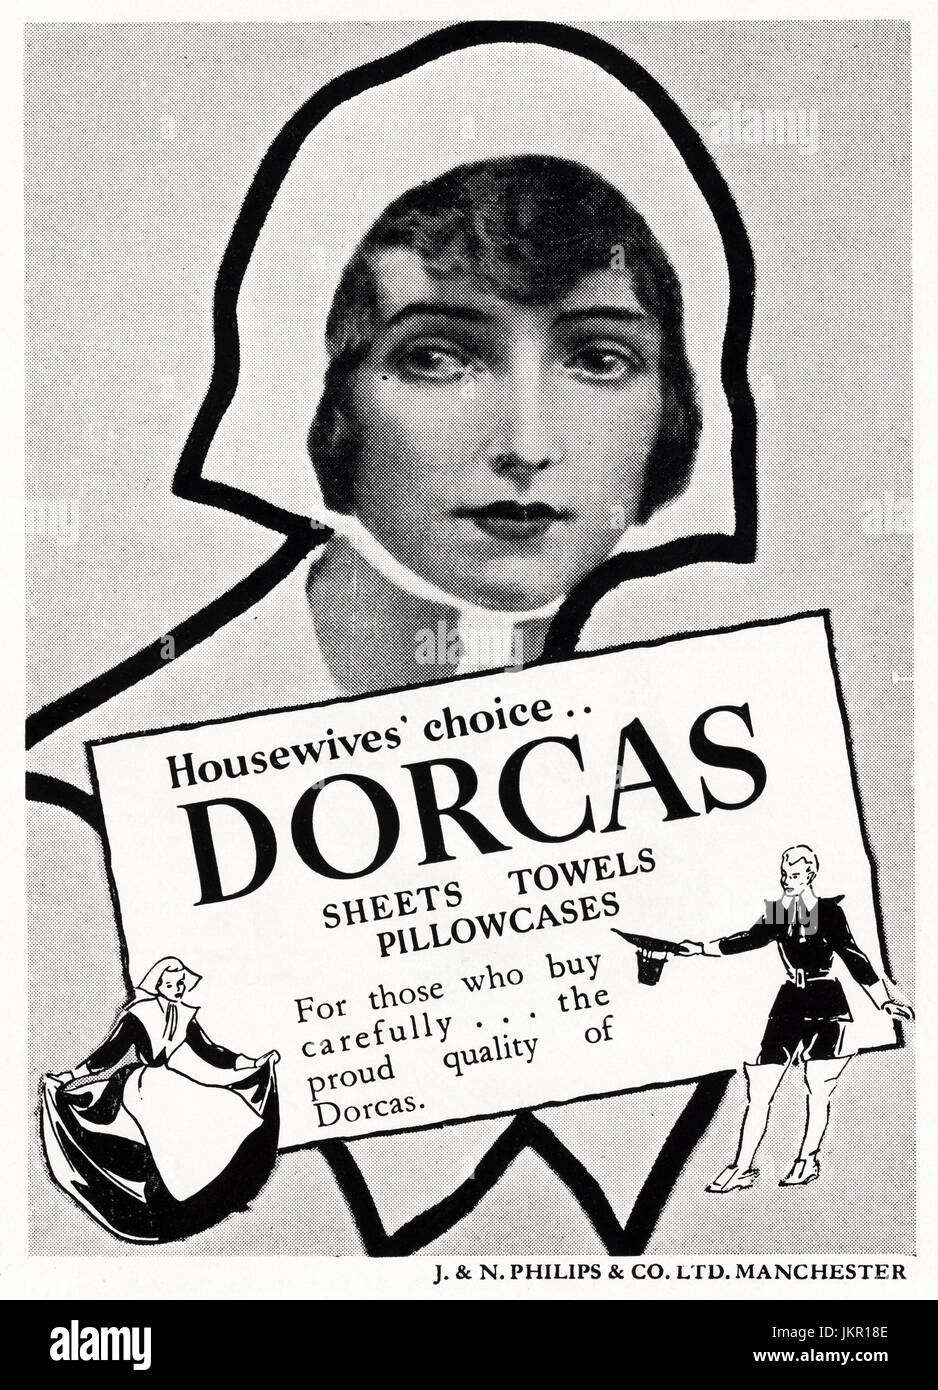 1950s Old Vintage Original Advertisement Advertising Dorcas Sheets Towels And Pillowcases In